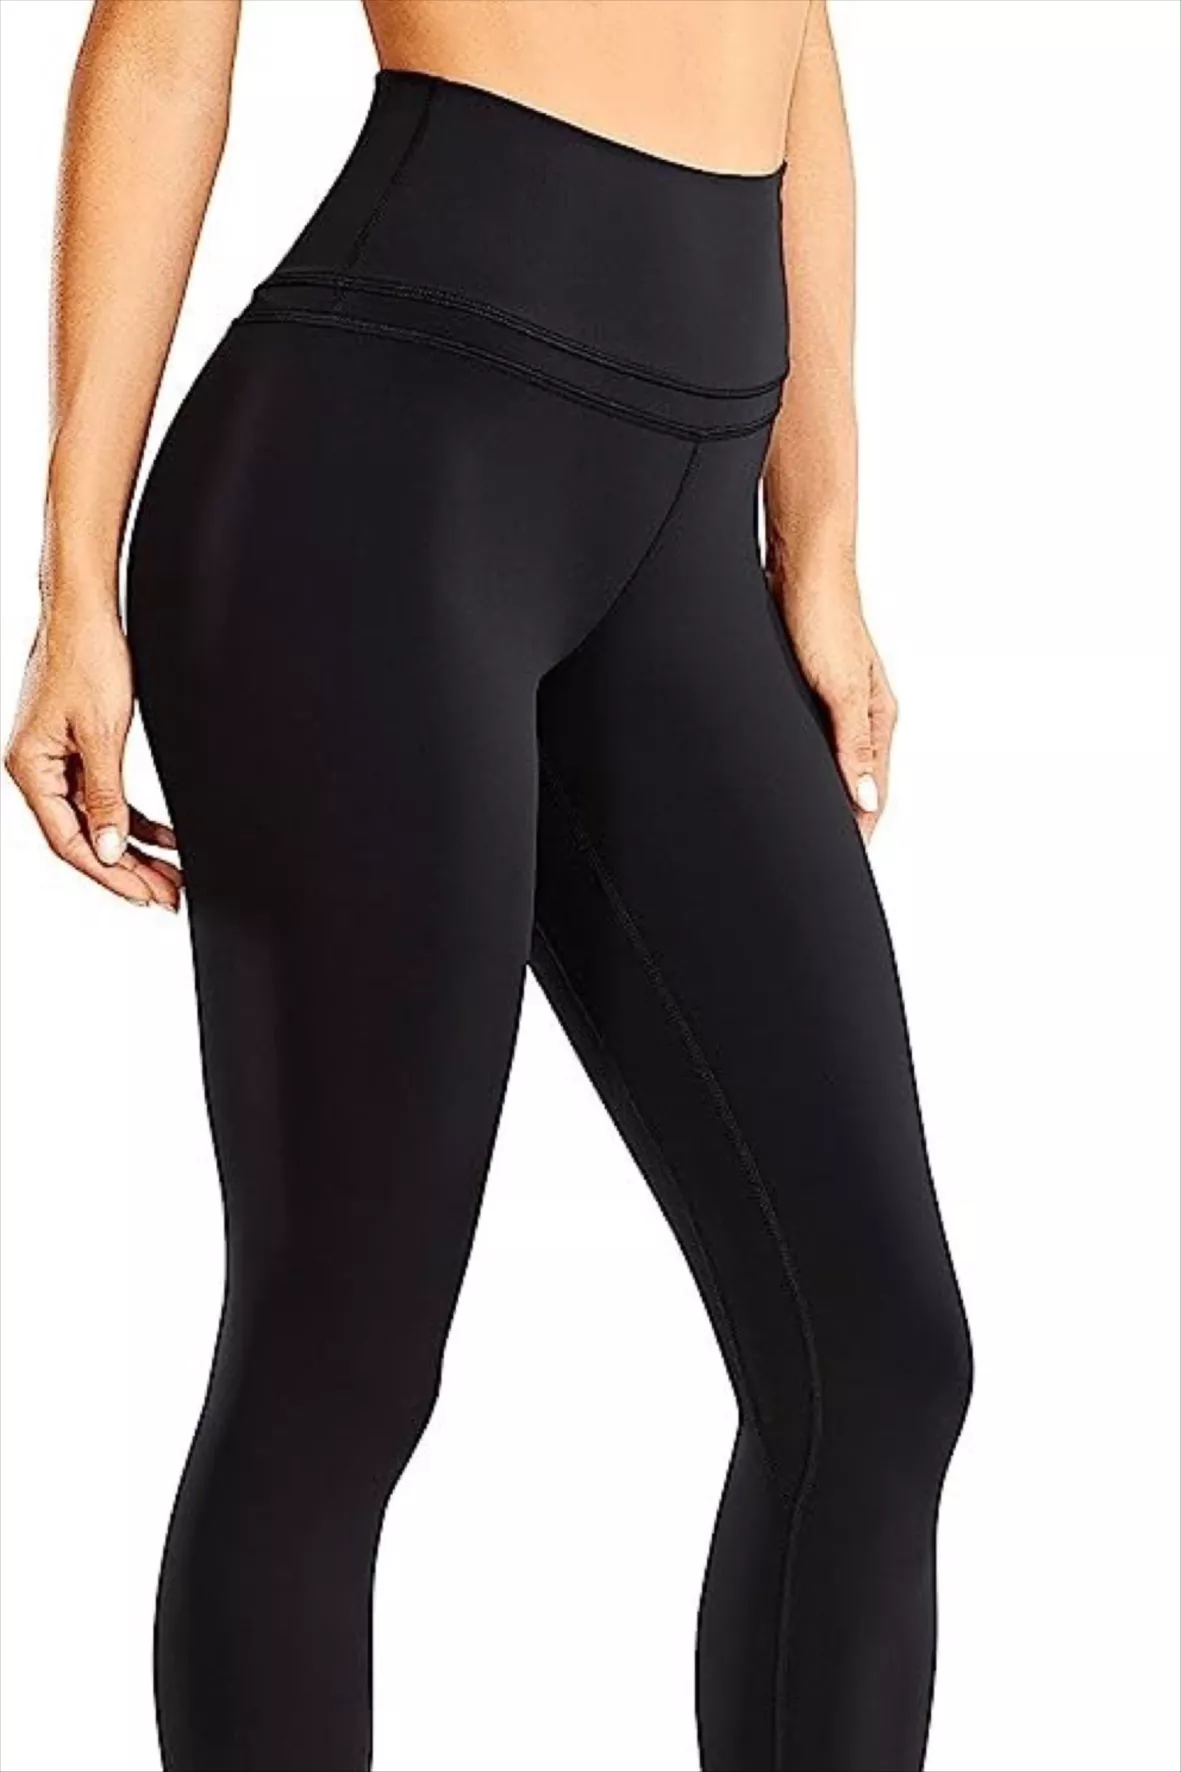 CRZ YOGA High Waisted 25-Inch Workout Leggings for Women